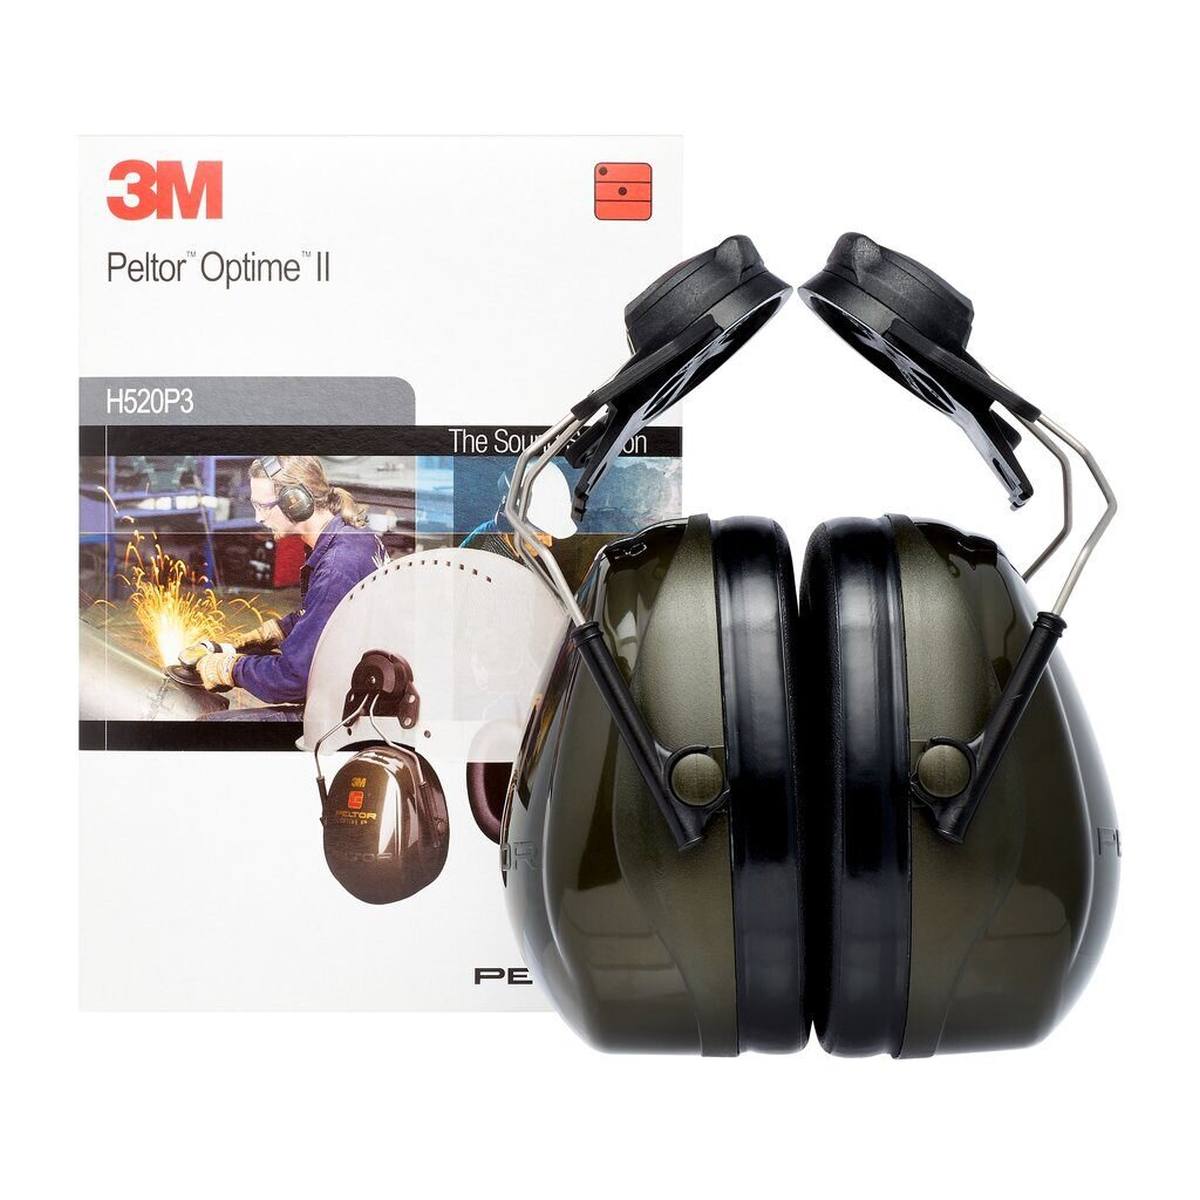 3M PELTOR Optime II earmuffs, dielectric helmet attachment, green, with helmet adapter P3E (for all 3M helmets, except G2000), SNR=30 dB, H520P3E1